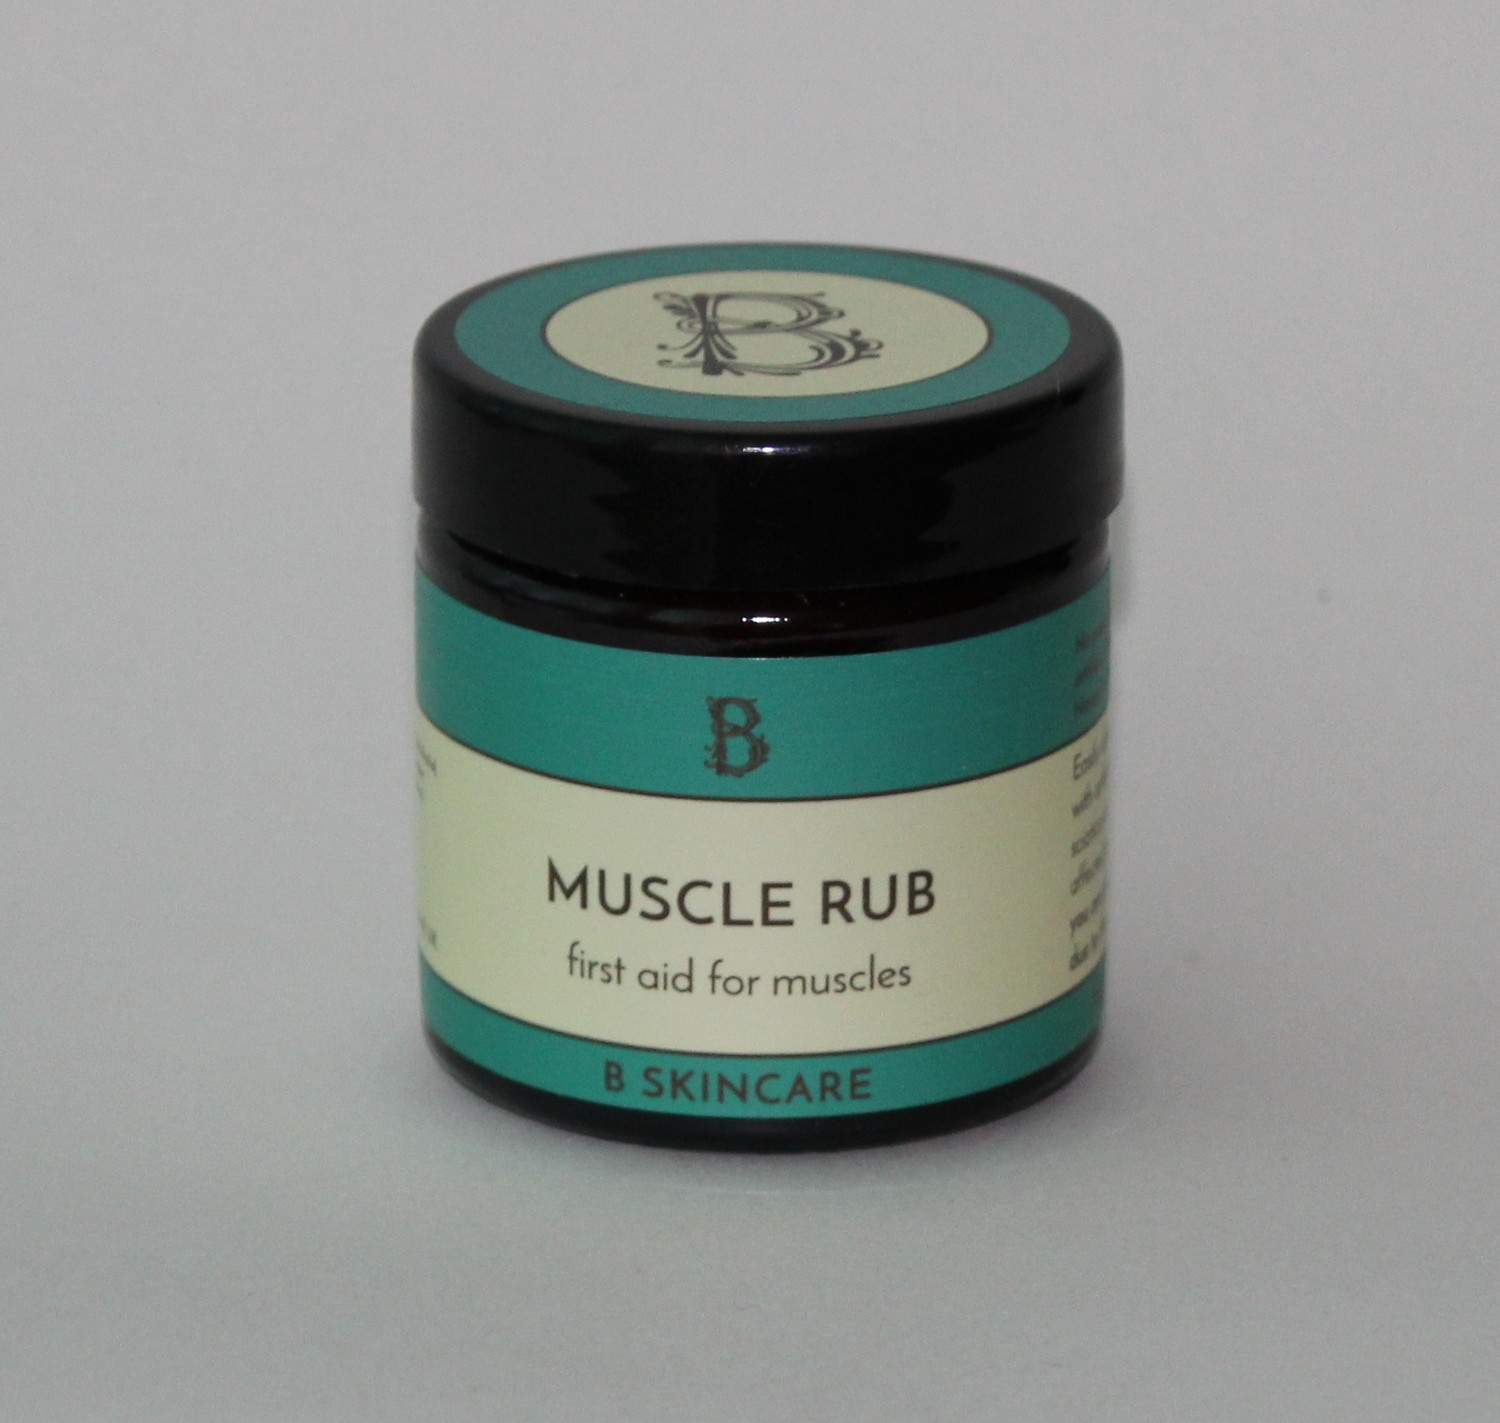 B Skincare Muscle and joint cream